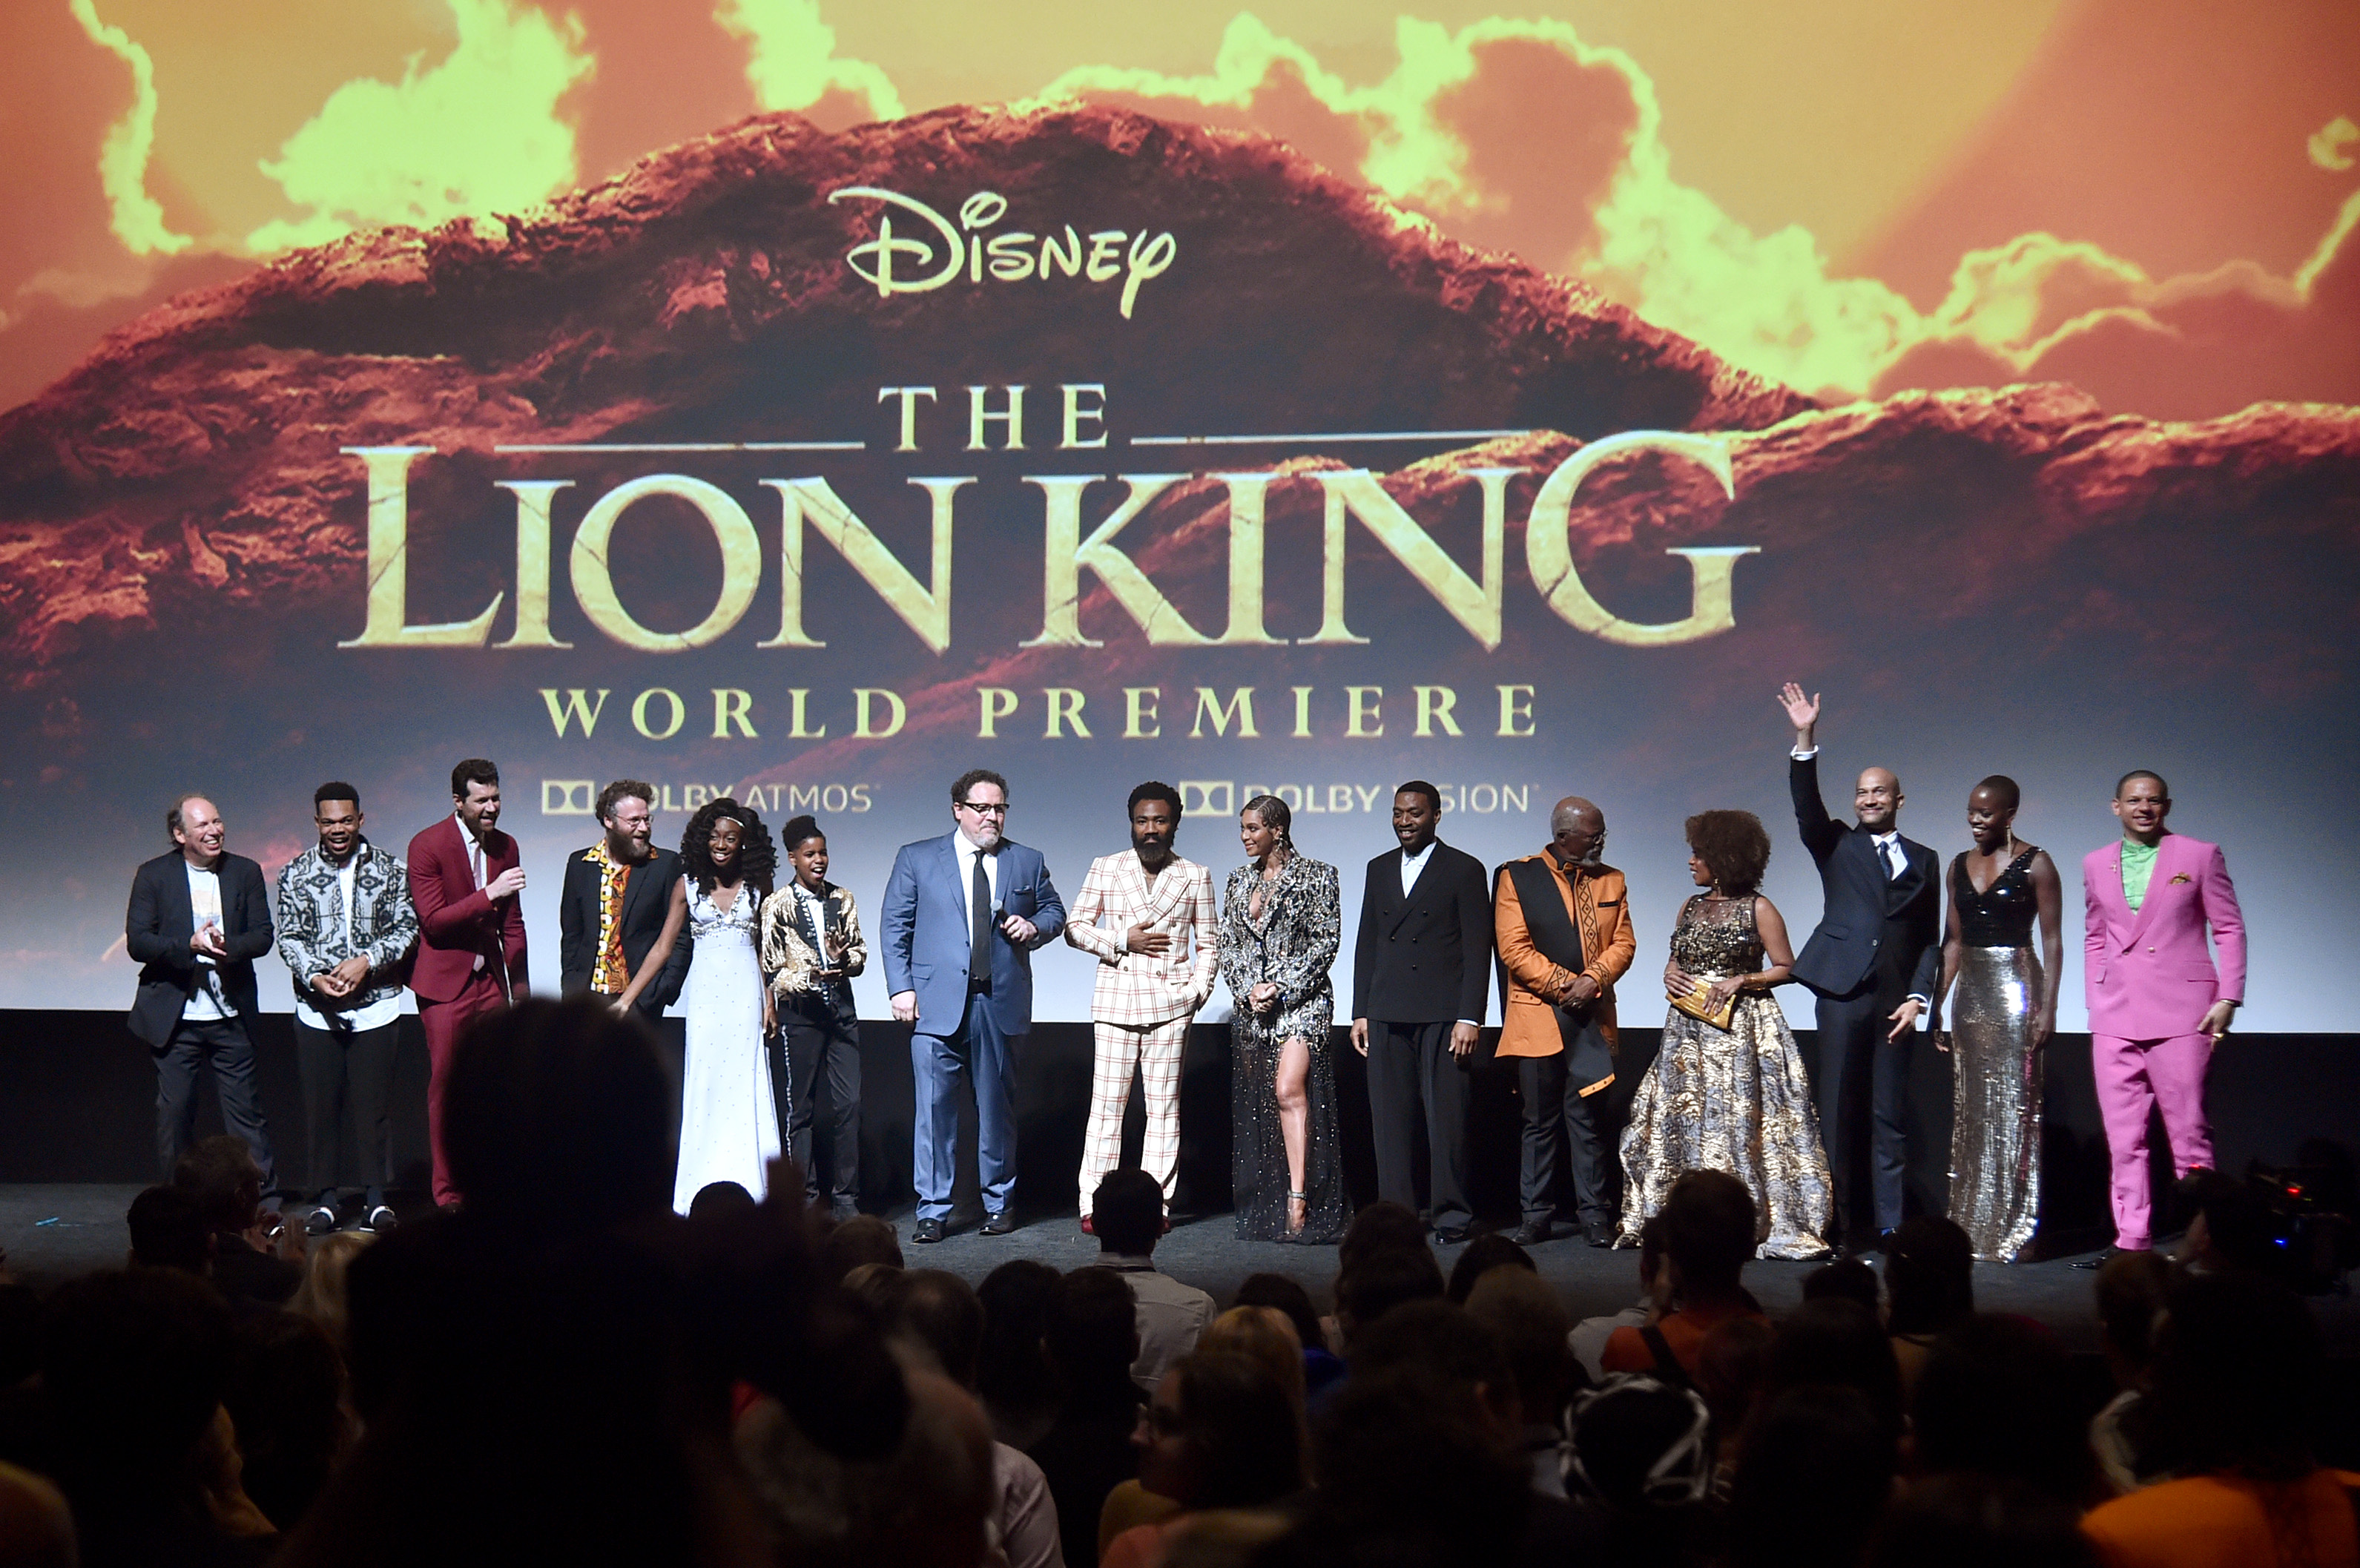 The World Premiere Of Disney’s “THE LION KING”